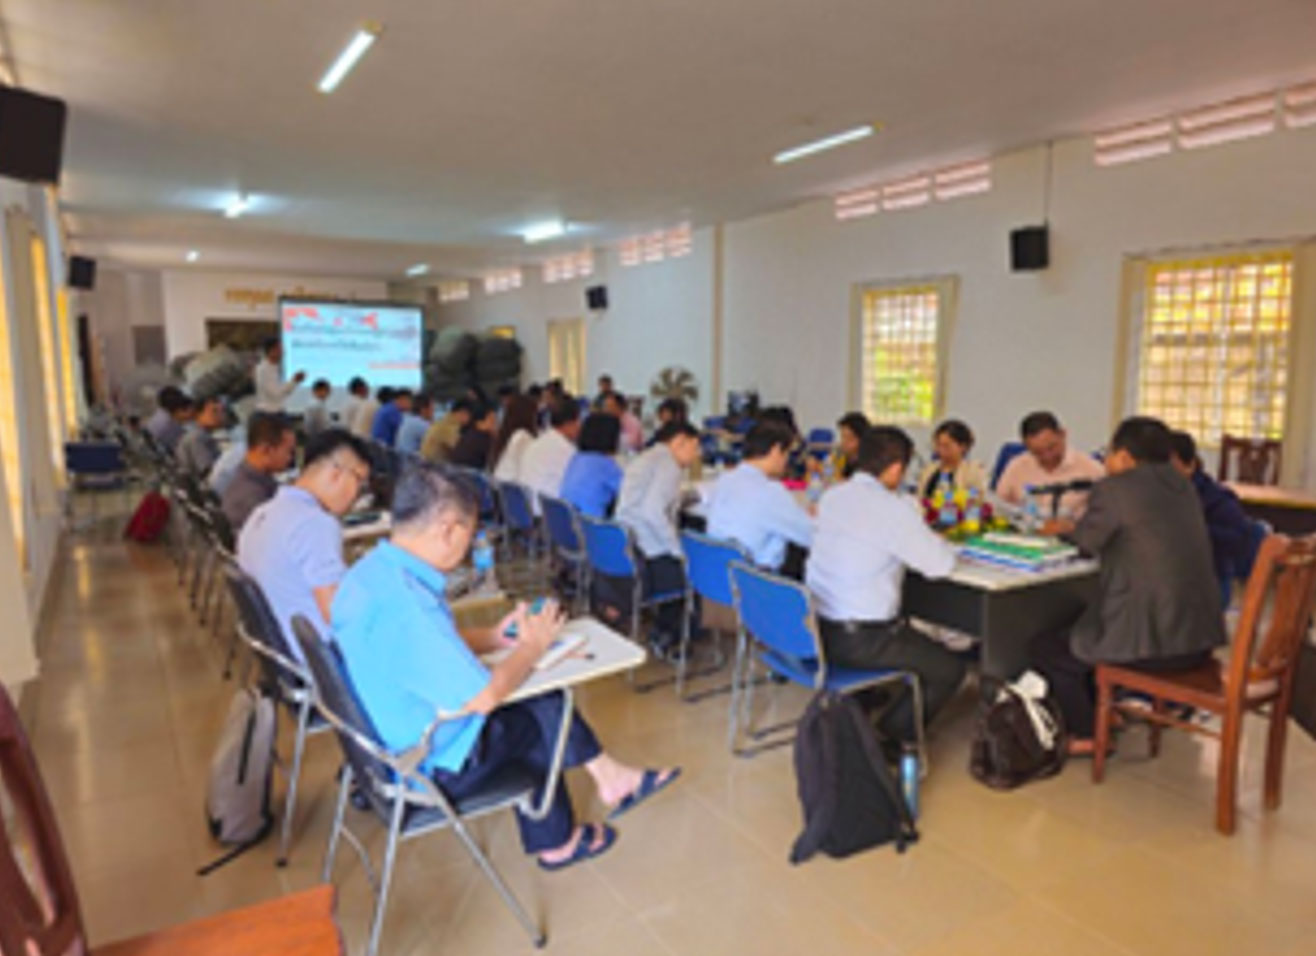 This workshop lead by external consultants to provide guidance on how to draft waste management plans, District of Soutr Nikom, Cambodia